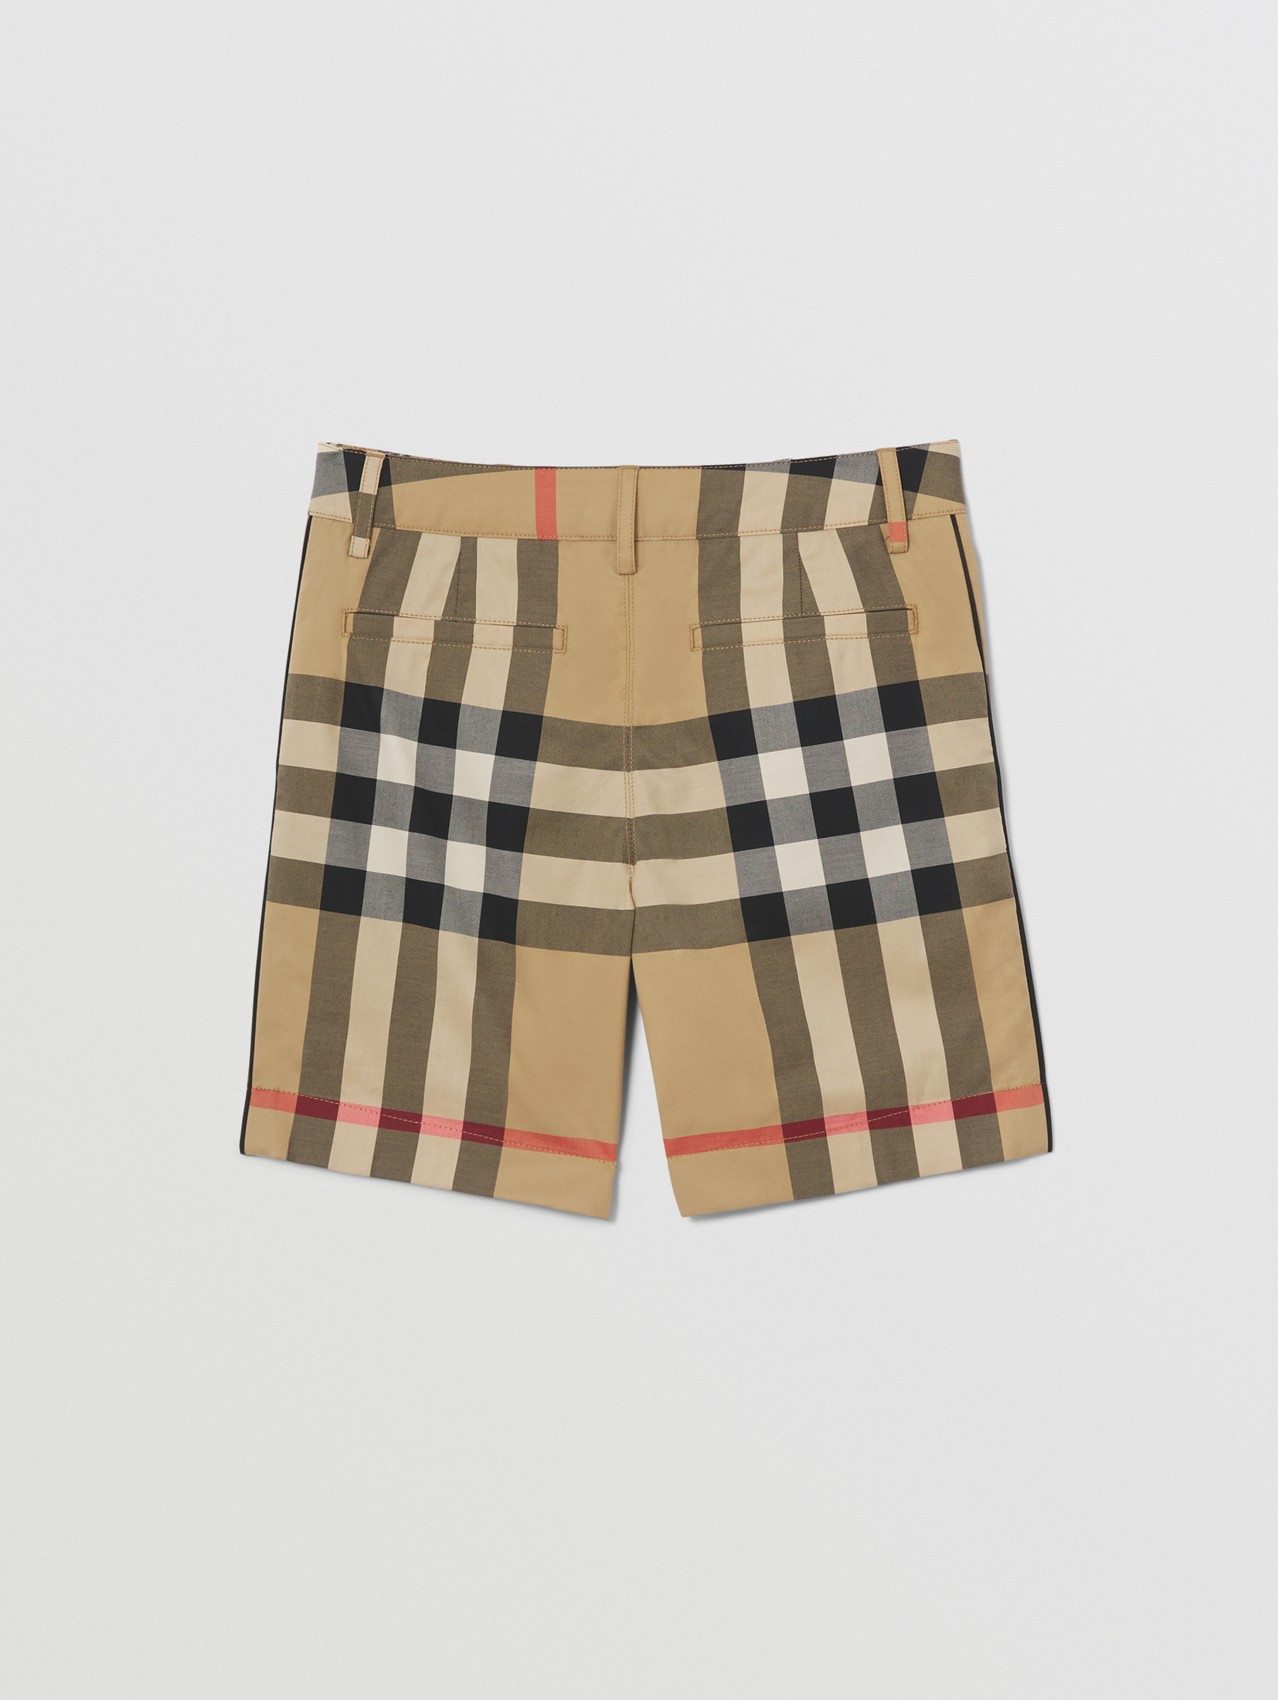 Gifts | Designer Gifts For Kids Burberry® Official